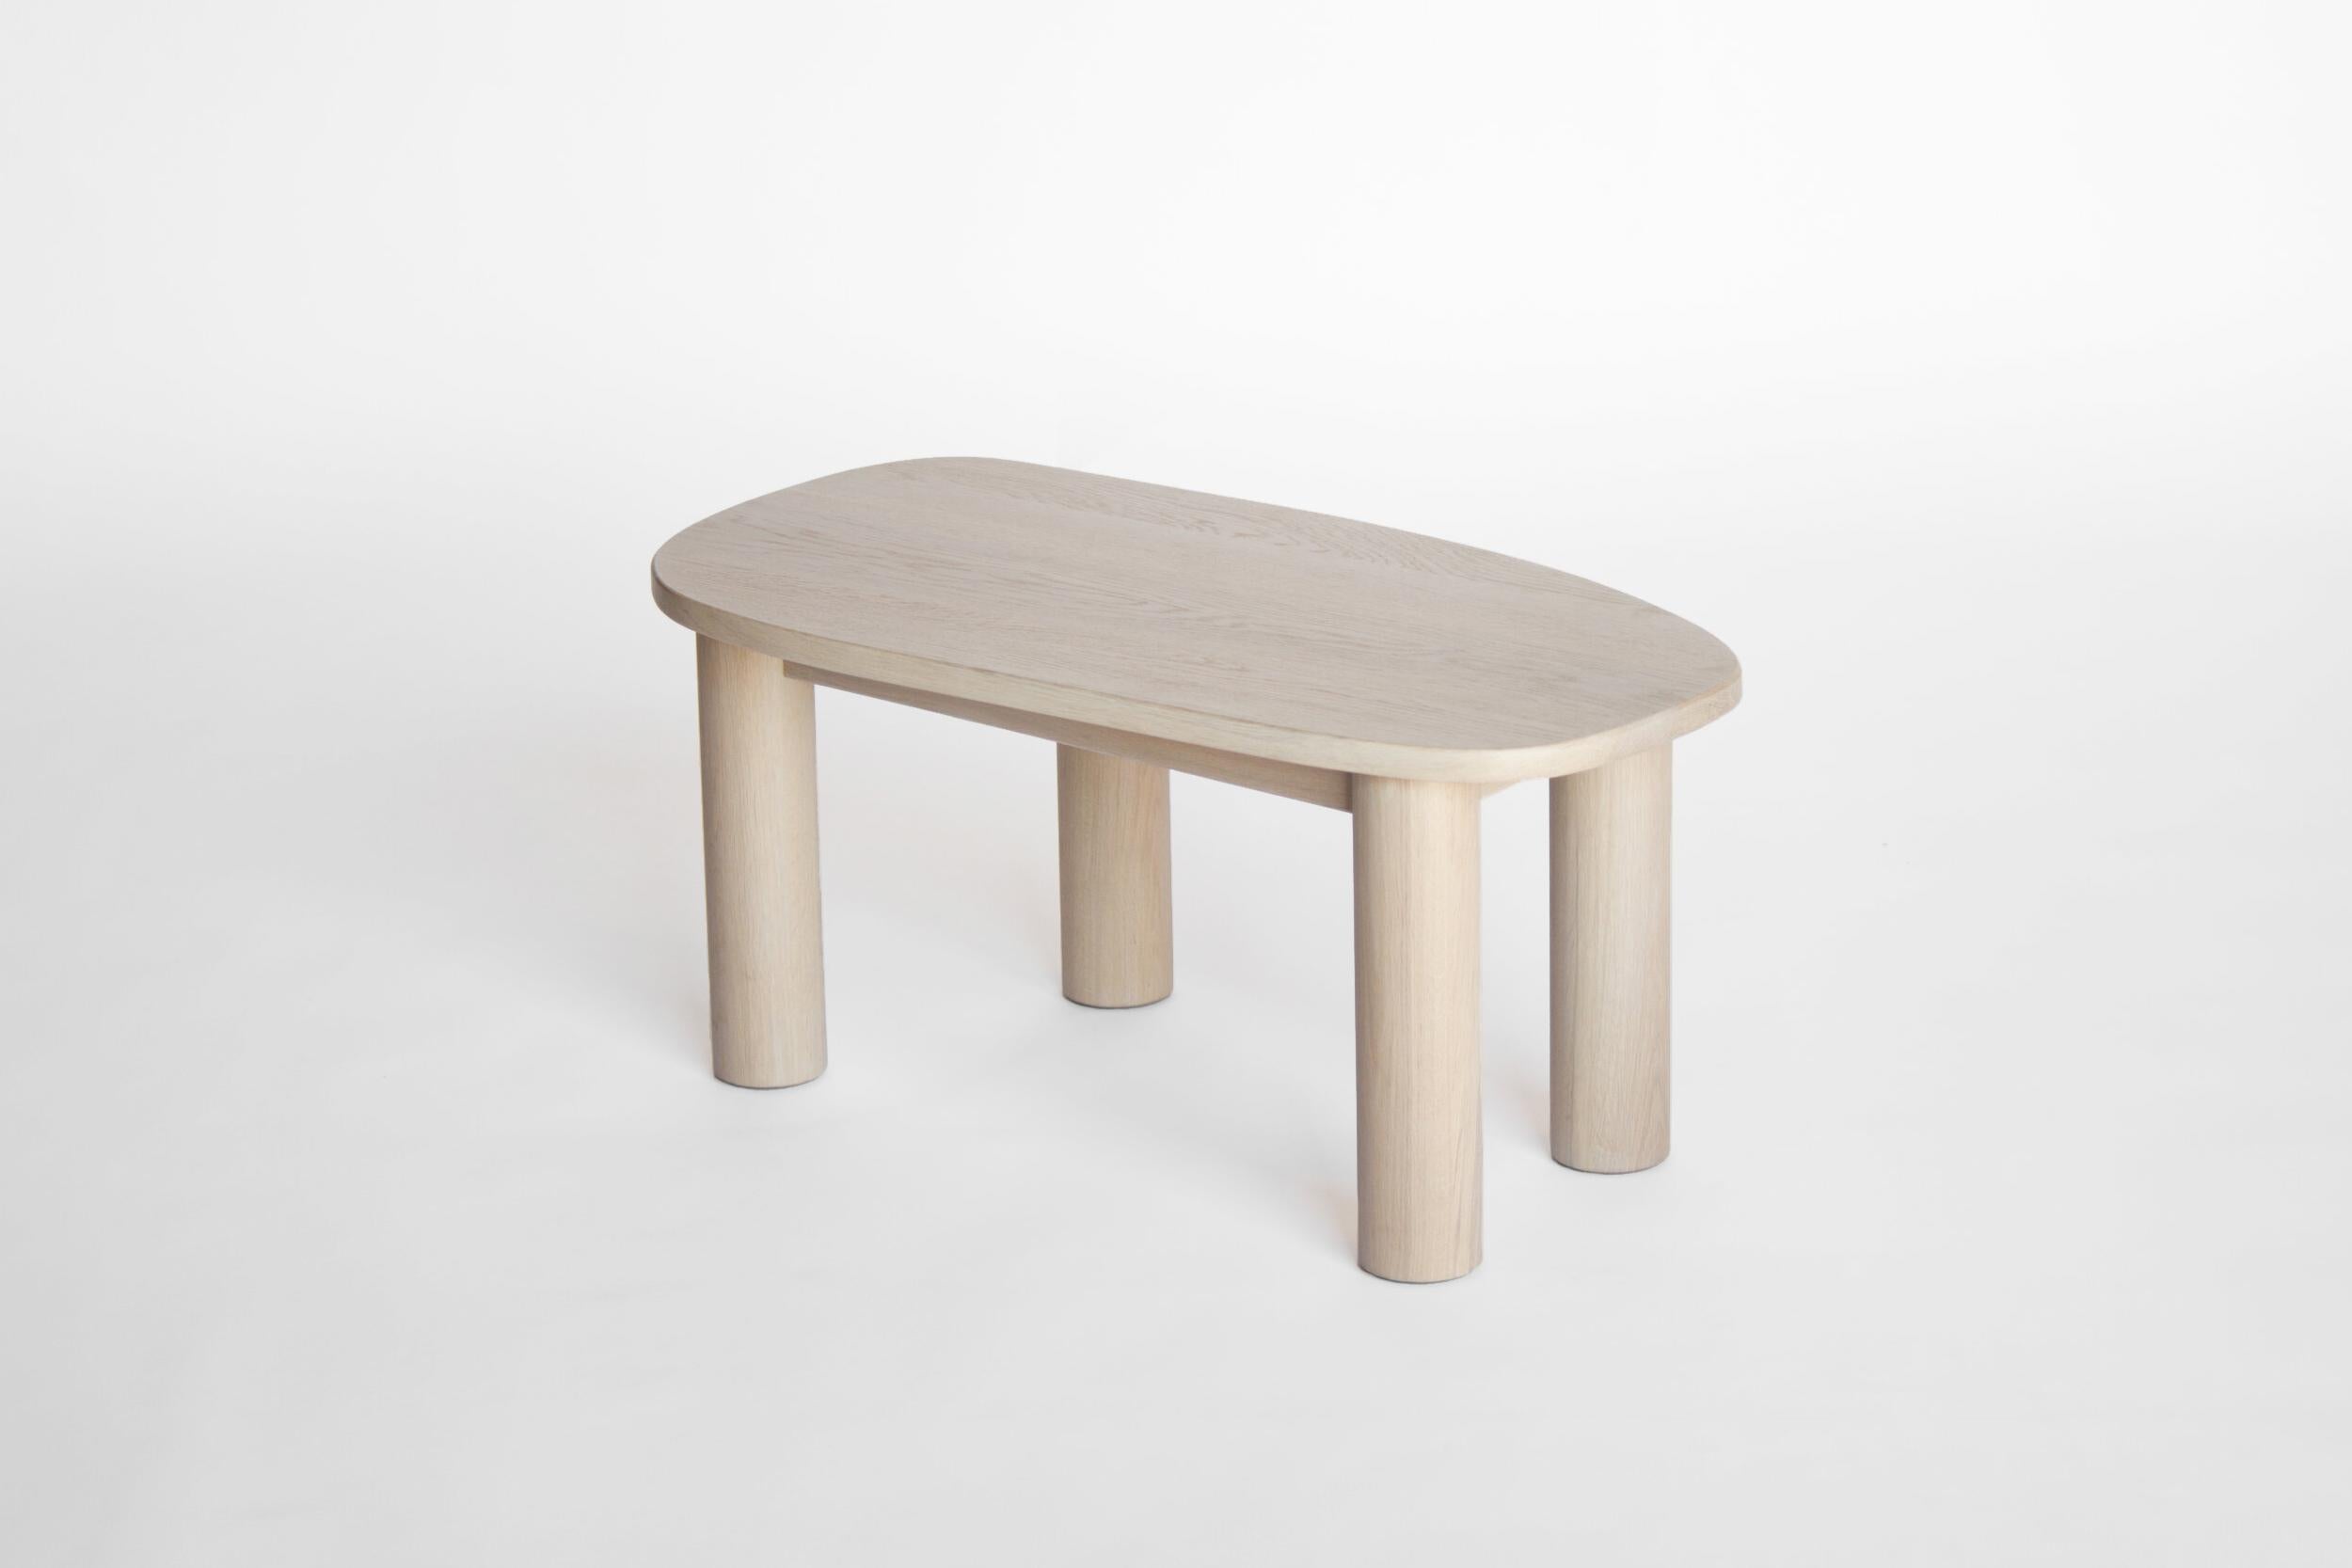 Sun at Six is a contemporary furniture design studio that works with traditional Chinese joinery masters to handcraft our pieces using traditional joinery. Our Classic coffee table simple, versatile and functional. Tenna oil is hand